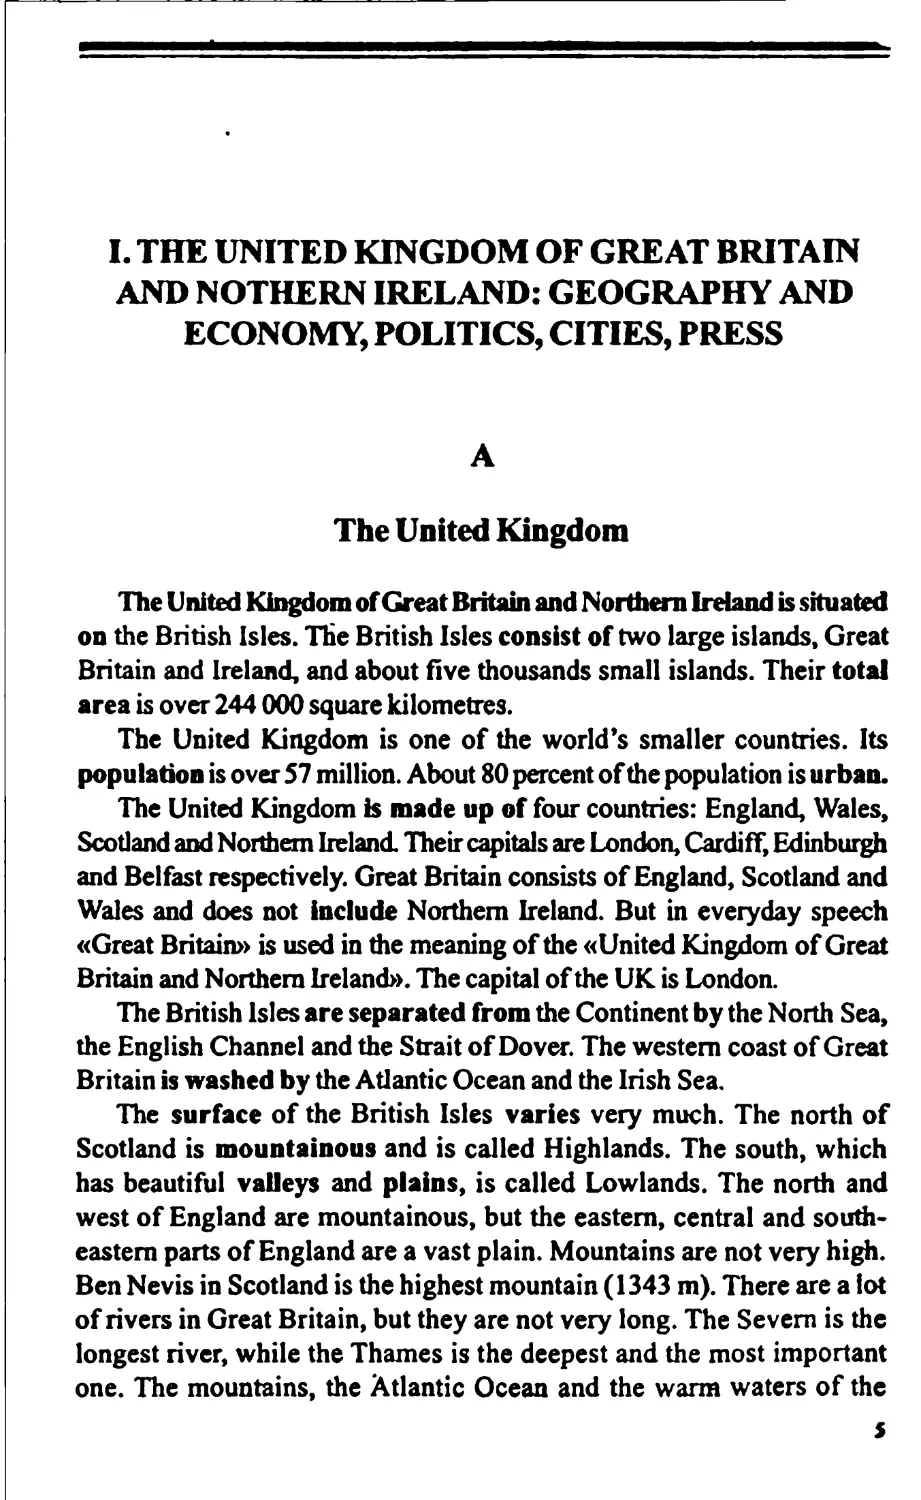 I.	THE UNITED KINGDOM OF GREAT BRITAIN AND NORTHERN IRELAND: GEOGRAPHY AND ECONOMY, POLITICS, CITIES, PRESS